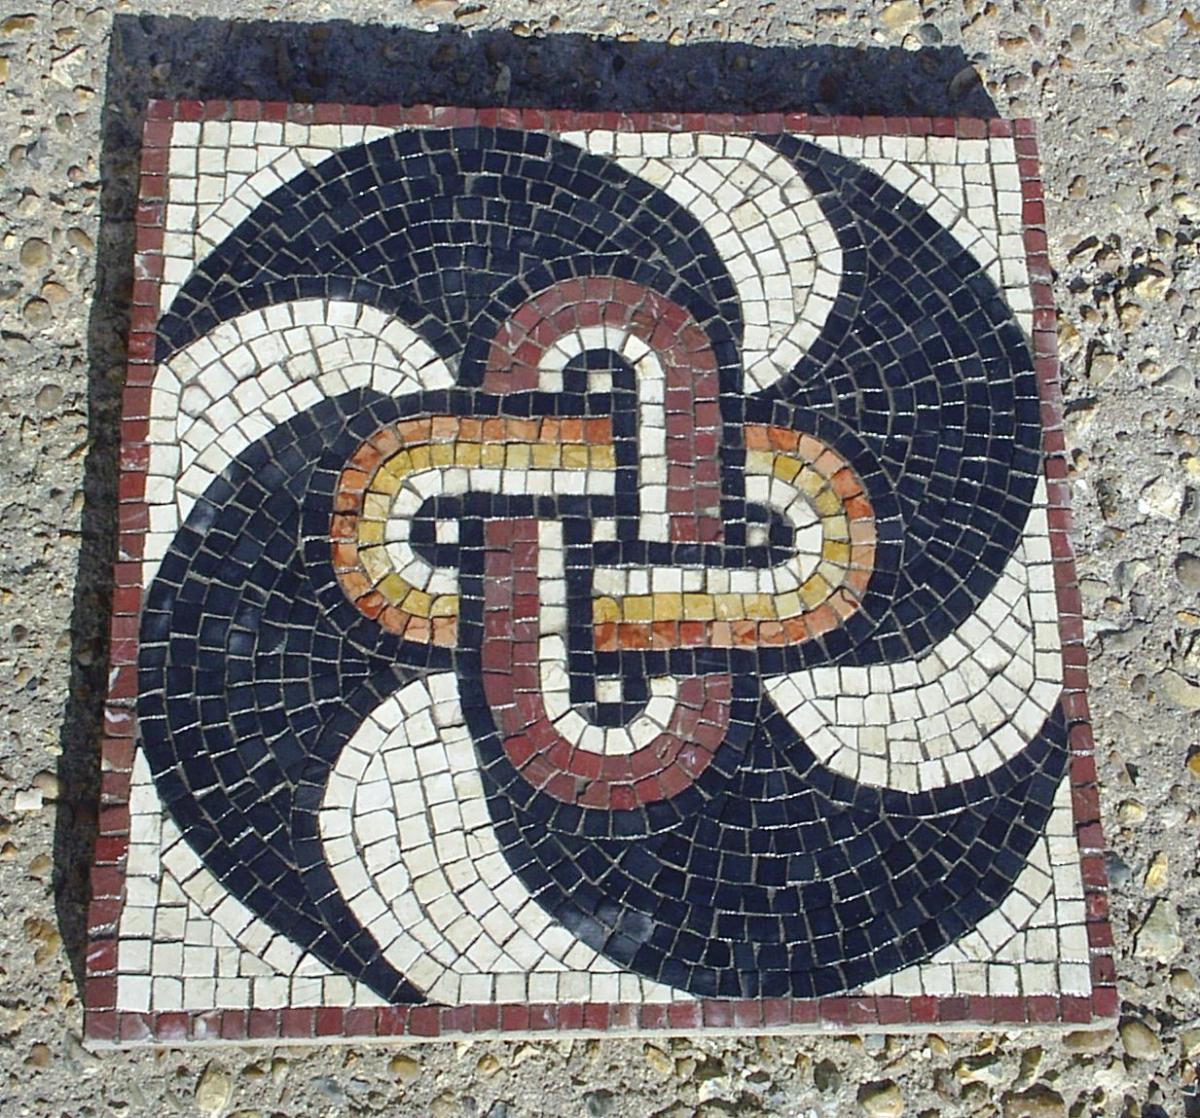 Swastika-peltae pattern with central knot. marble mosaic on a paving slab, 400mm x 400mm